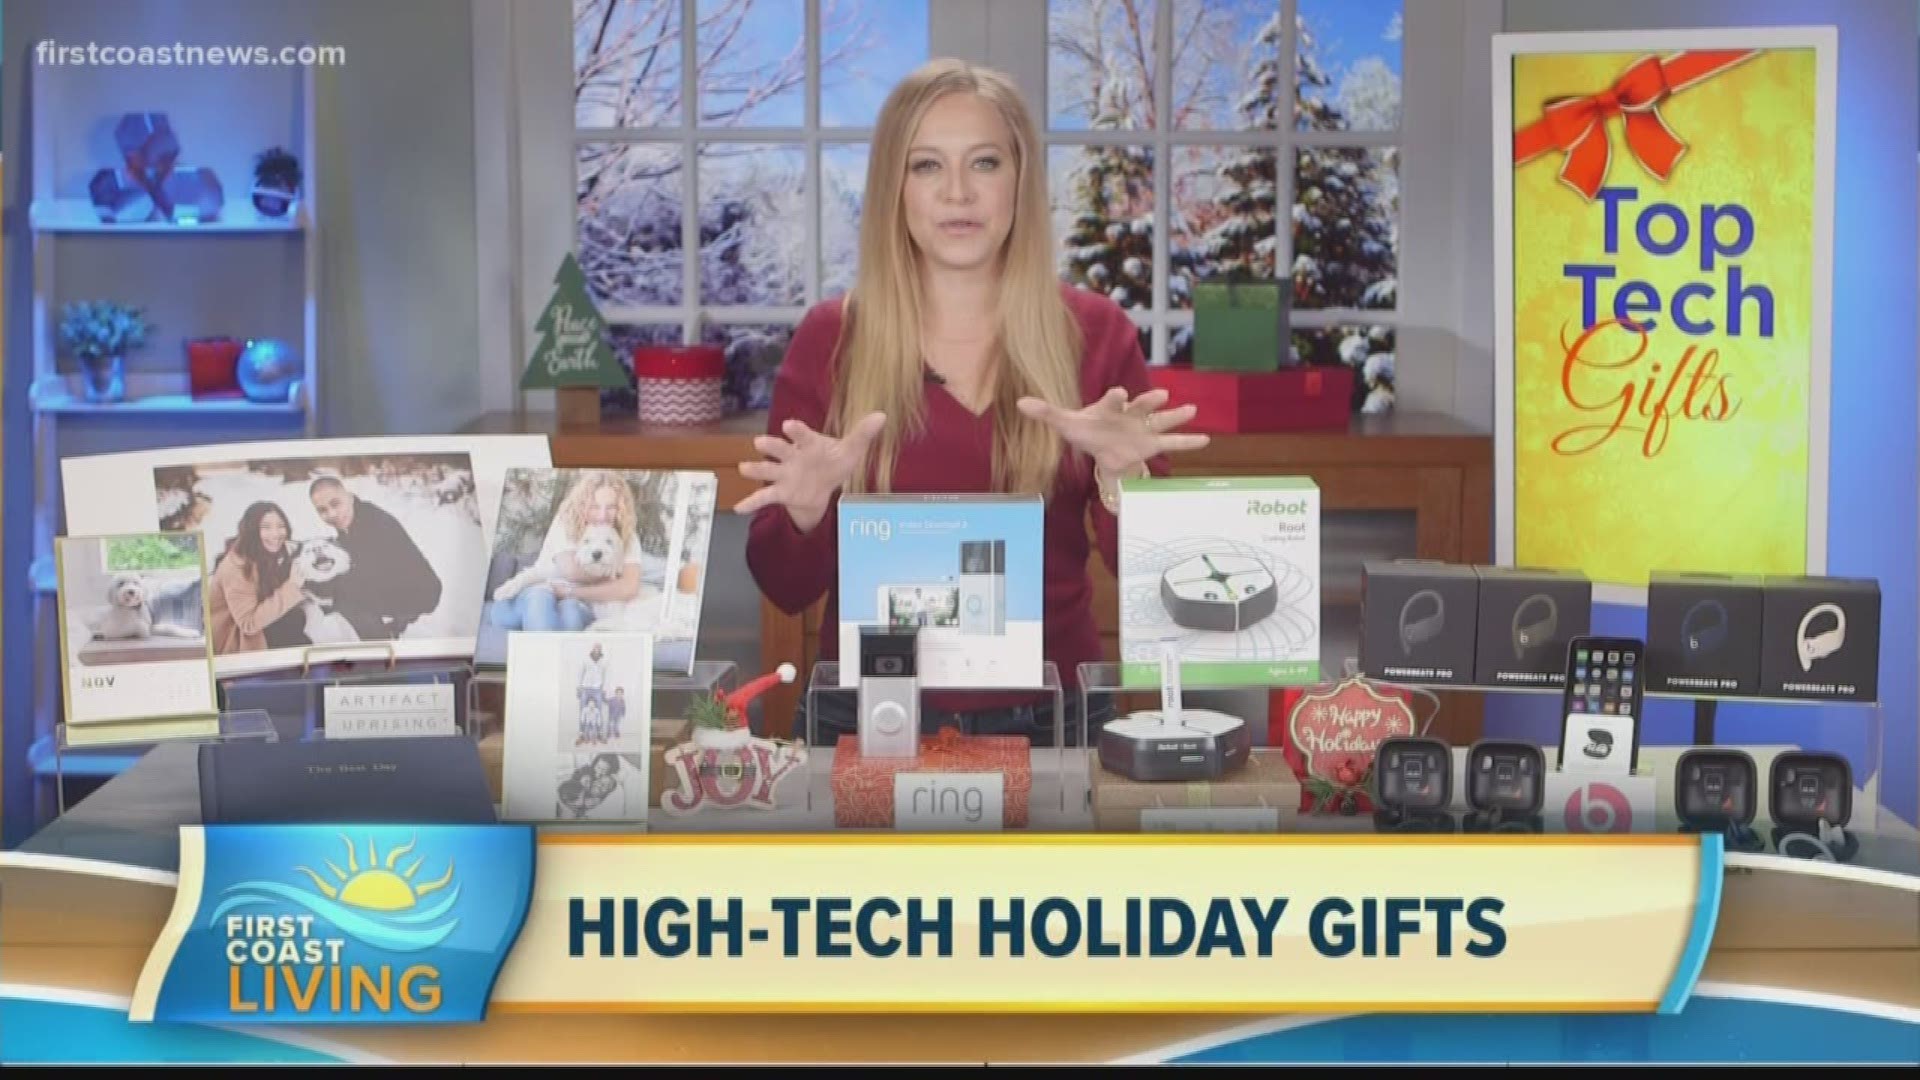 Get a great gift for that Tech lover in your life!